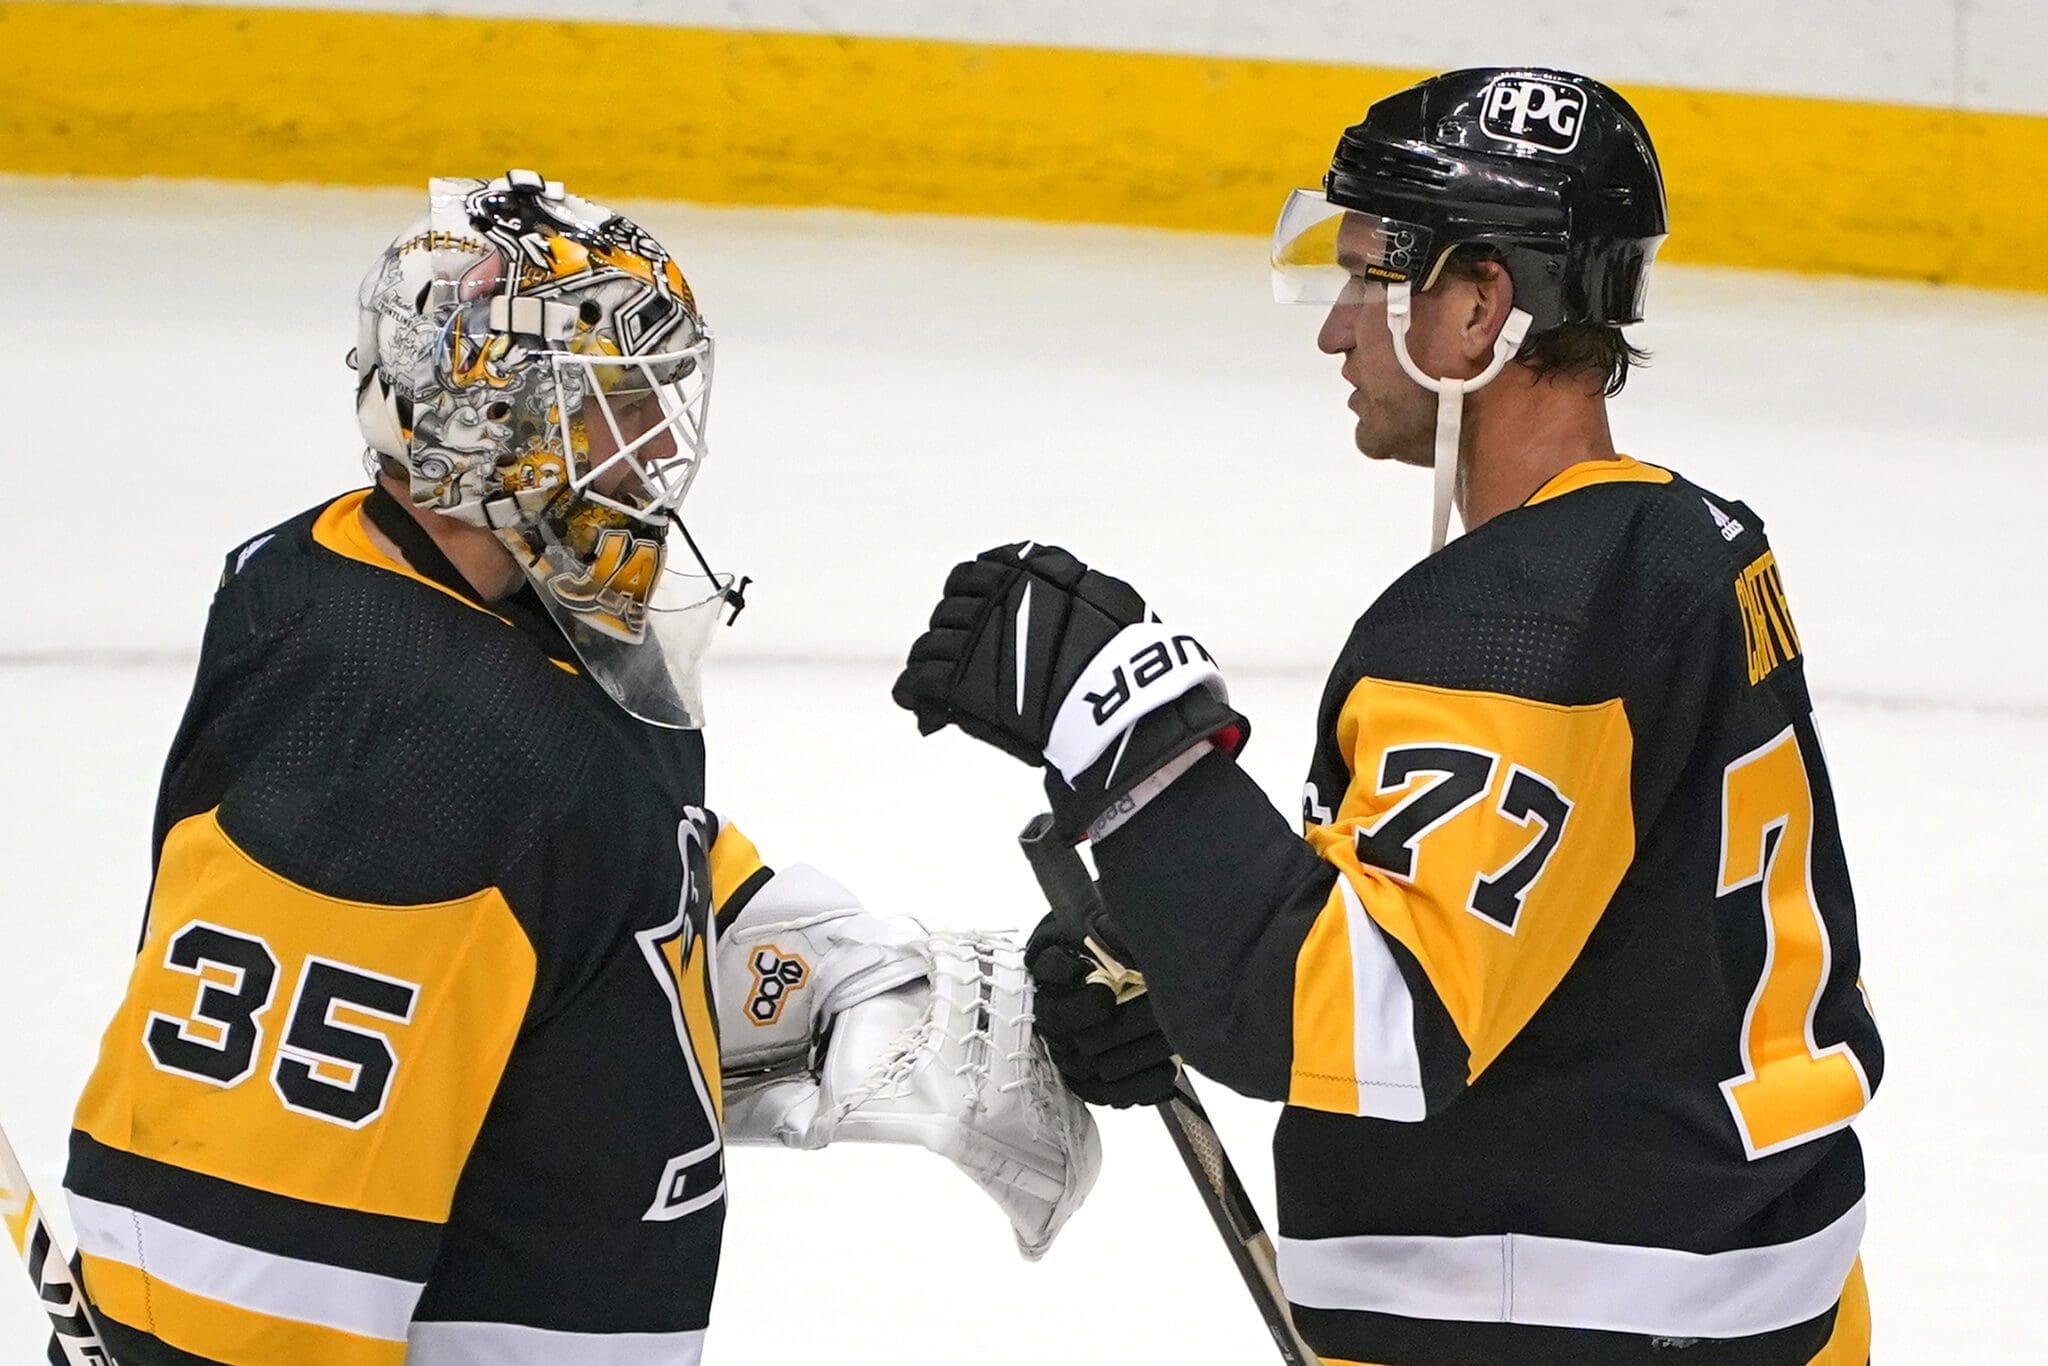 Zeroing in on the Penguins next new jersey, ranking the new